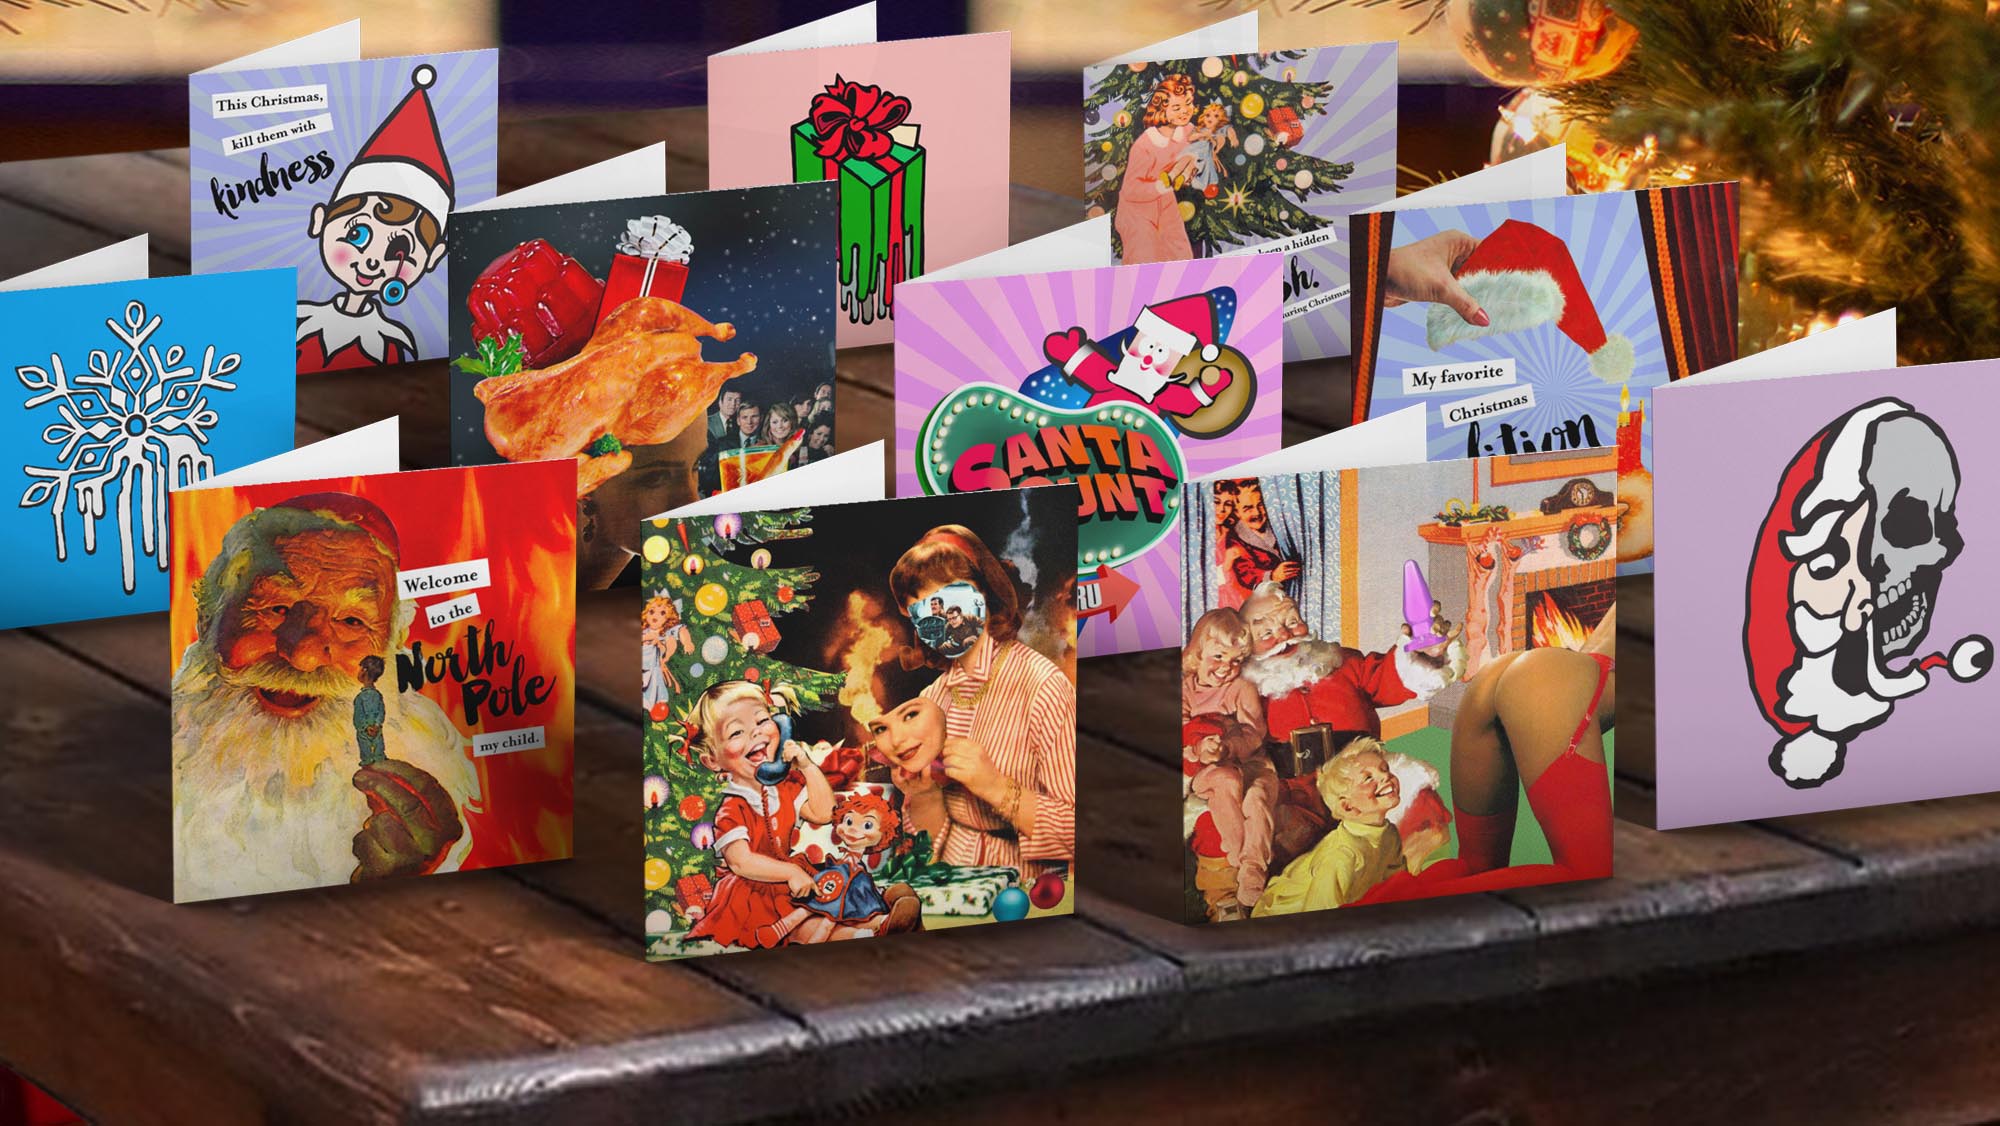 Provocative Christmas greeting cards by Joan Seed